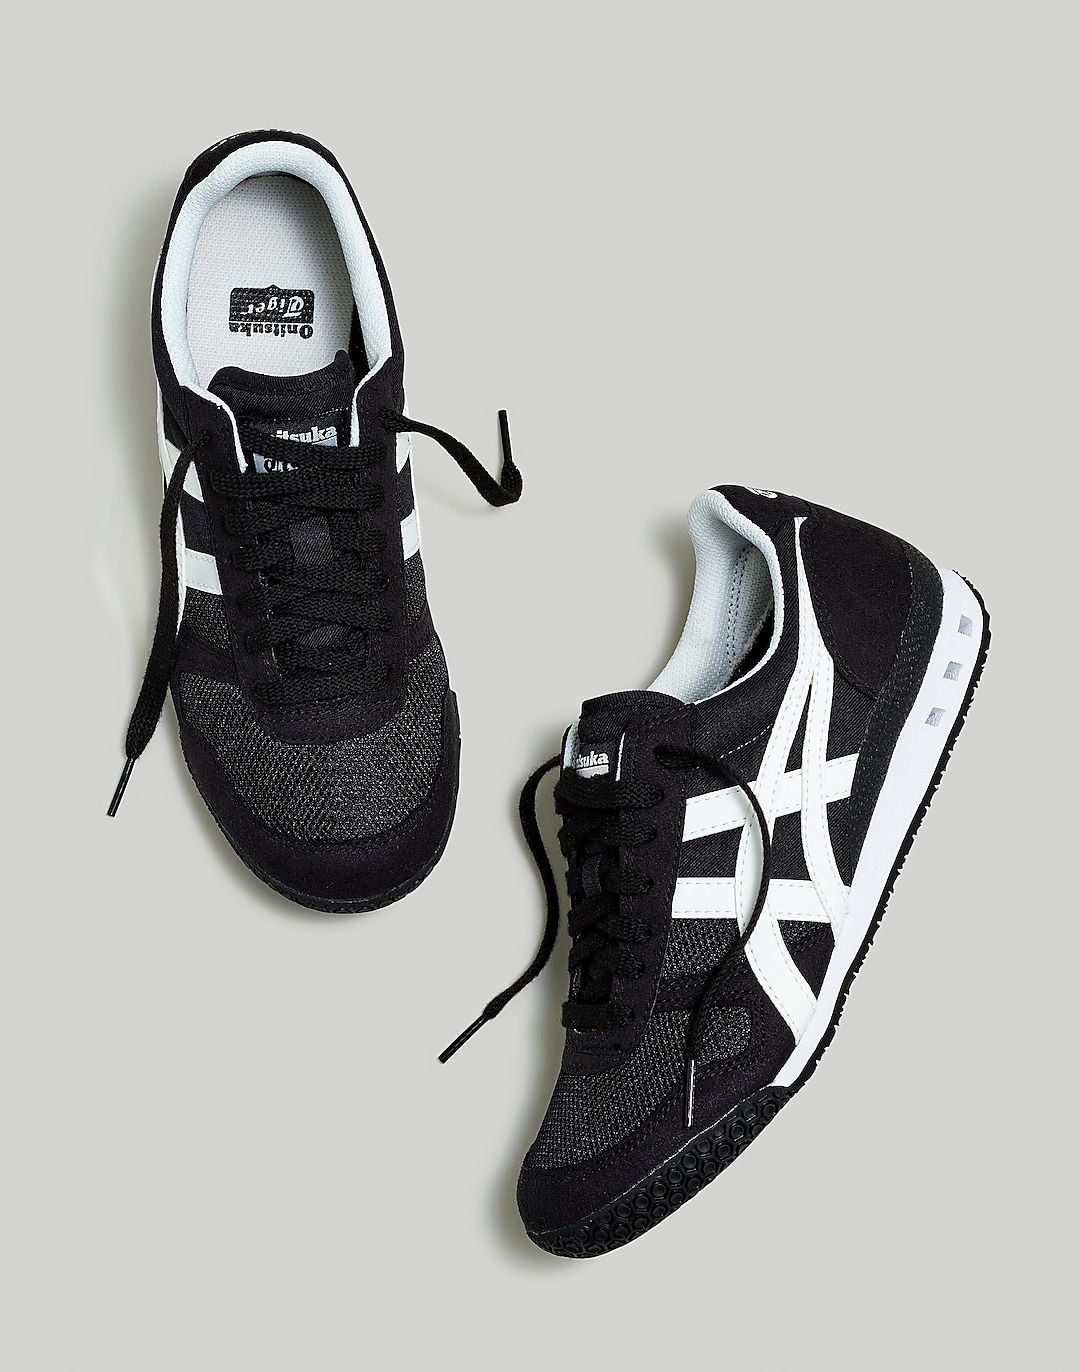 Onitsuka Tiger™ Traxy Trainer Sneakers | Madewell